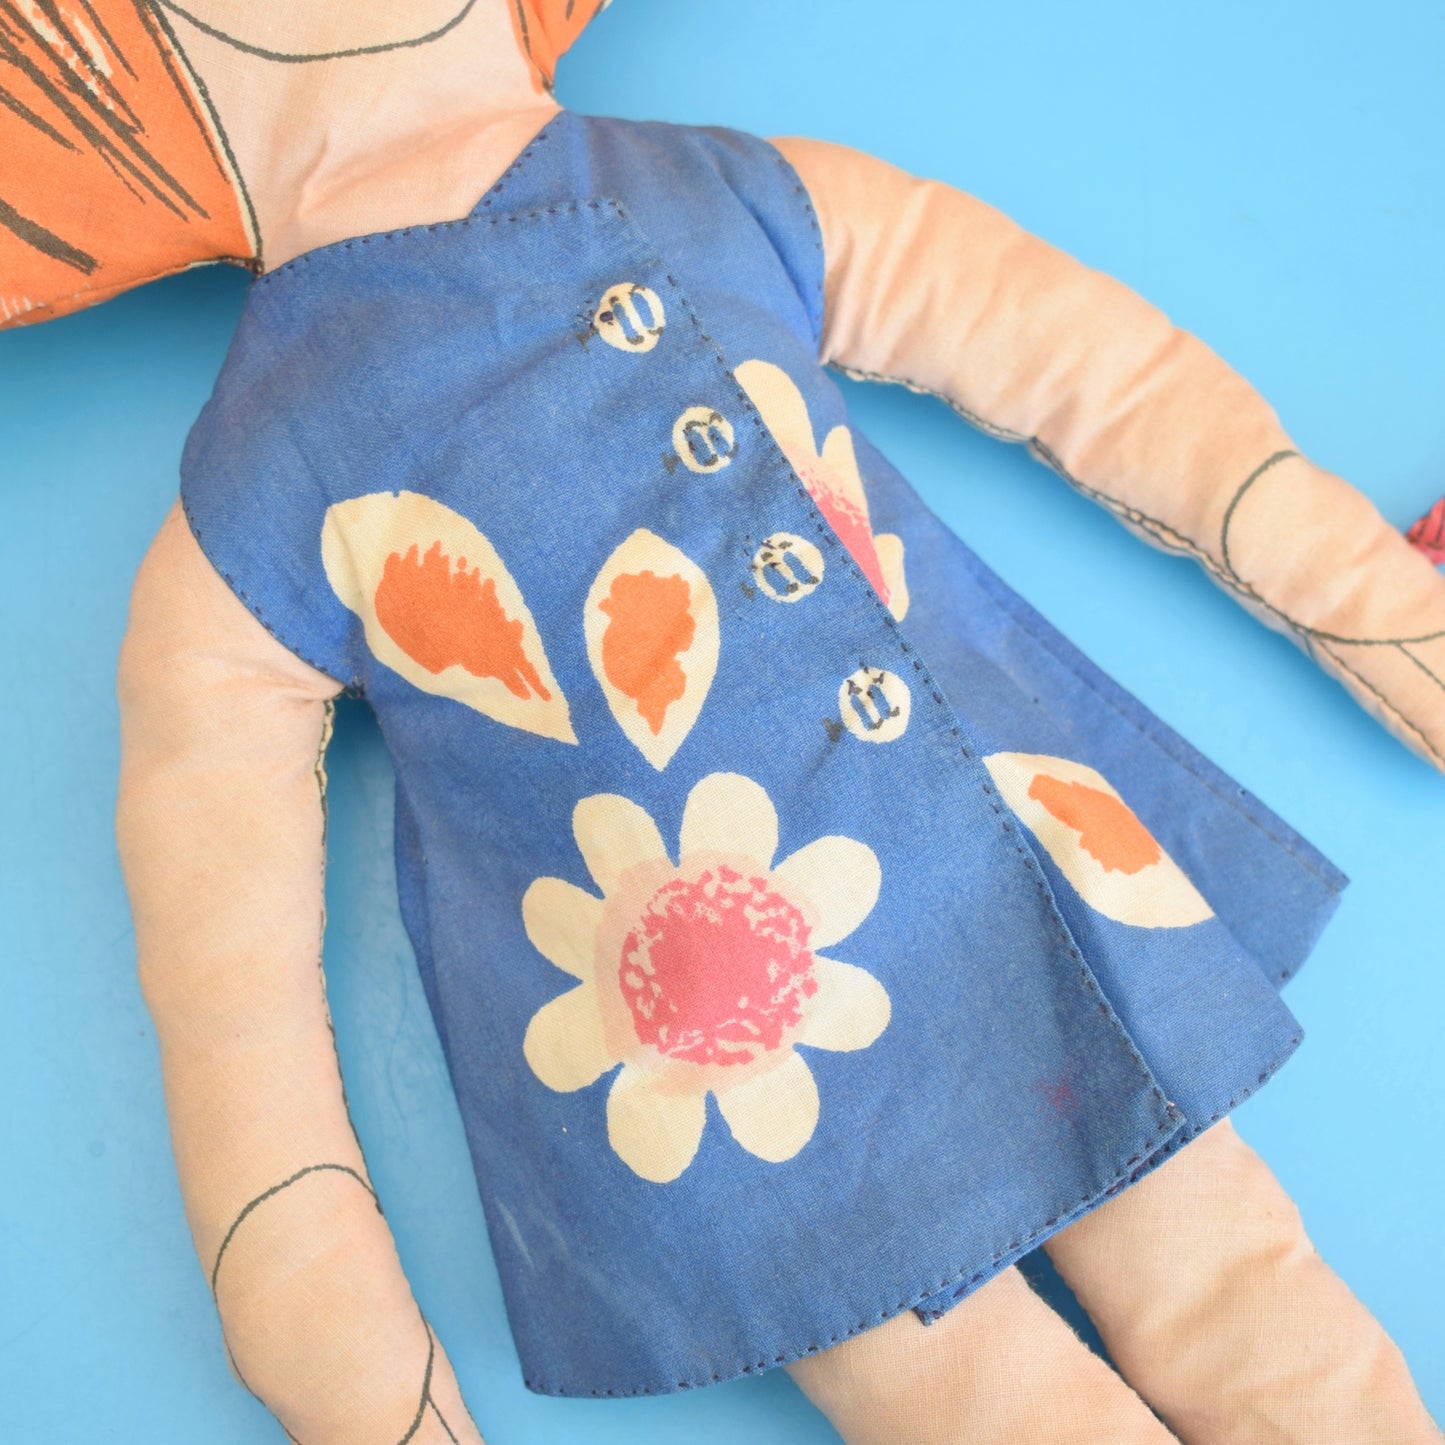 Vintage 1970s Kitsch Fabric Doll  - Red Head